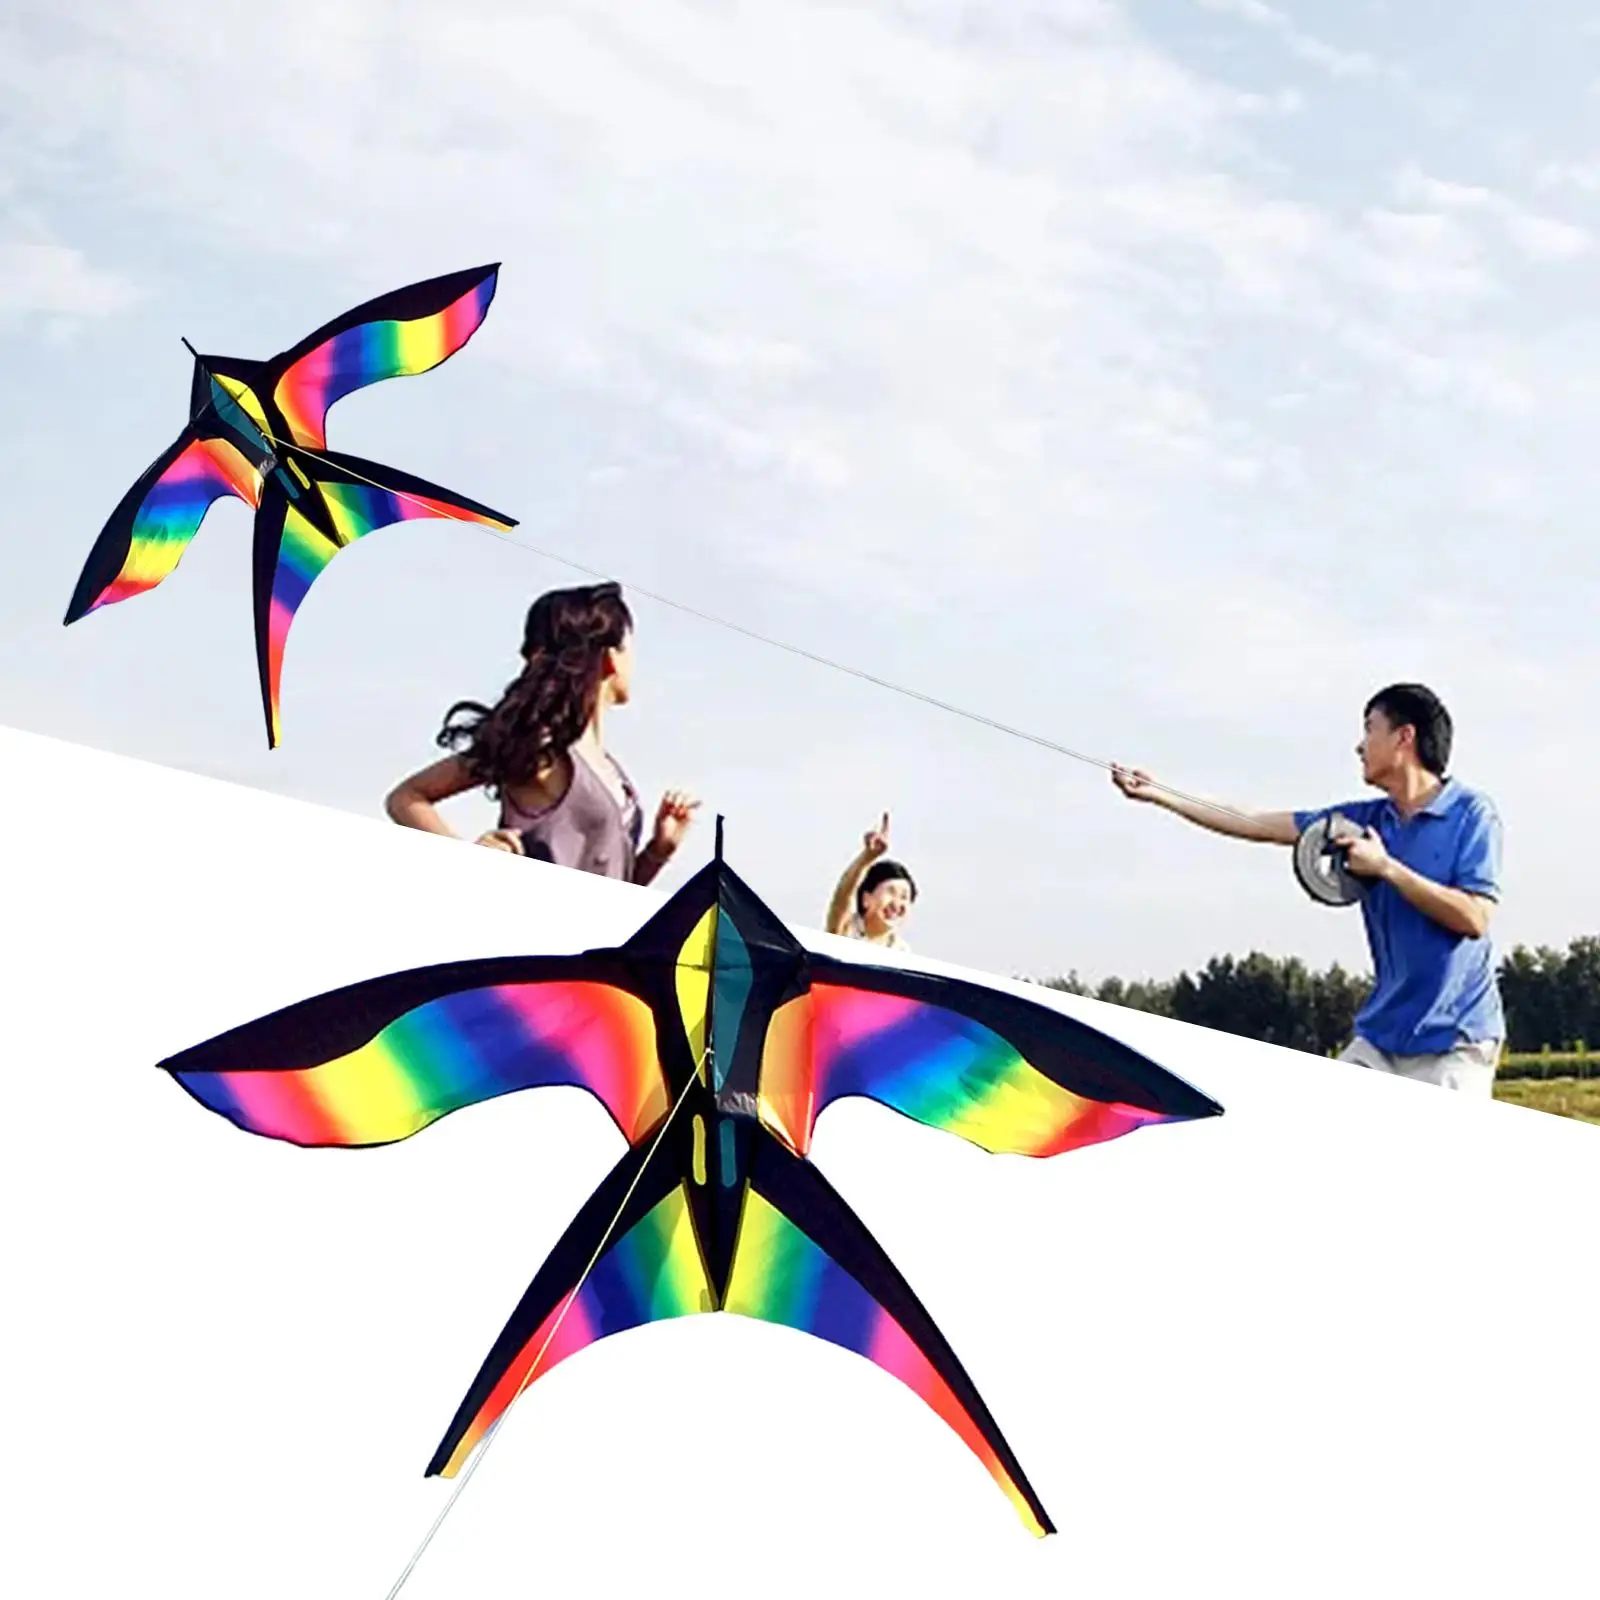 Giant Bird Kite Swallow Kite Single Line with String Huge Wingspan Easy to Fly Rainbow for Toy Beach Games Kids Adults Beginner